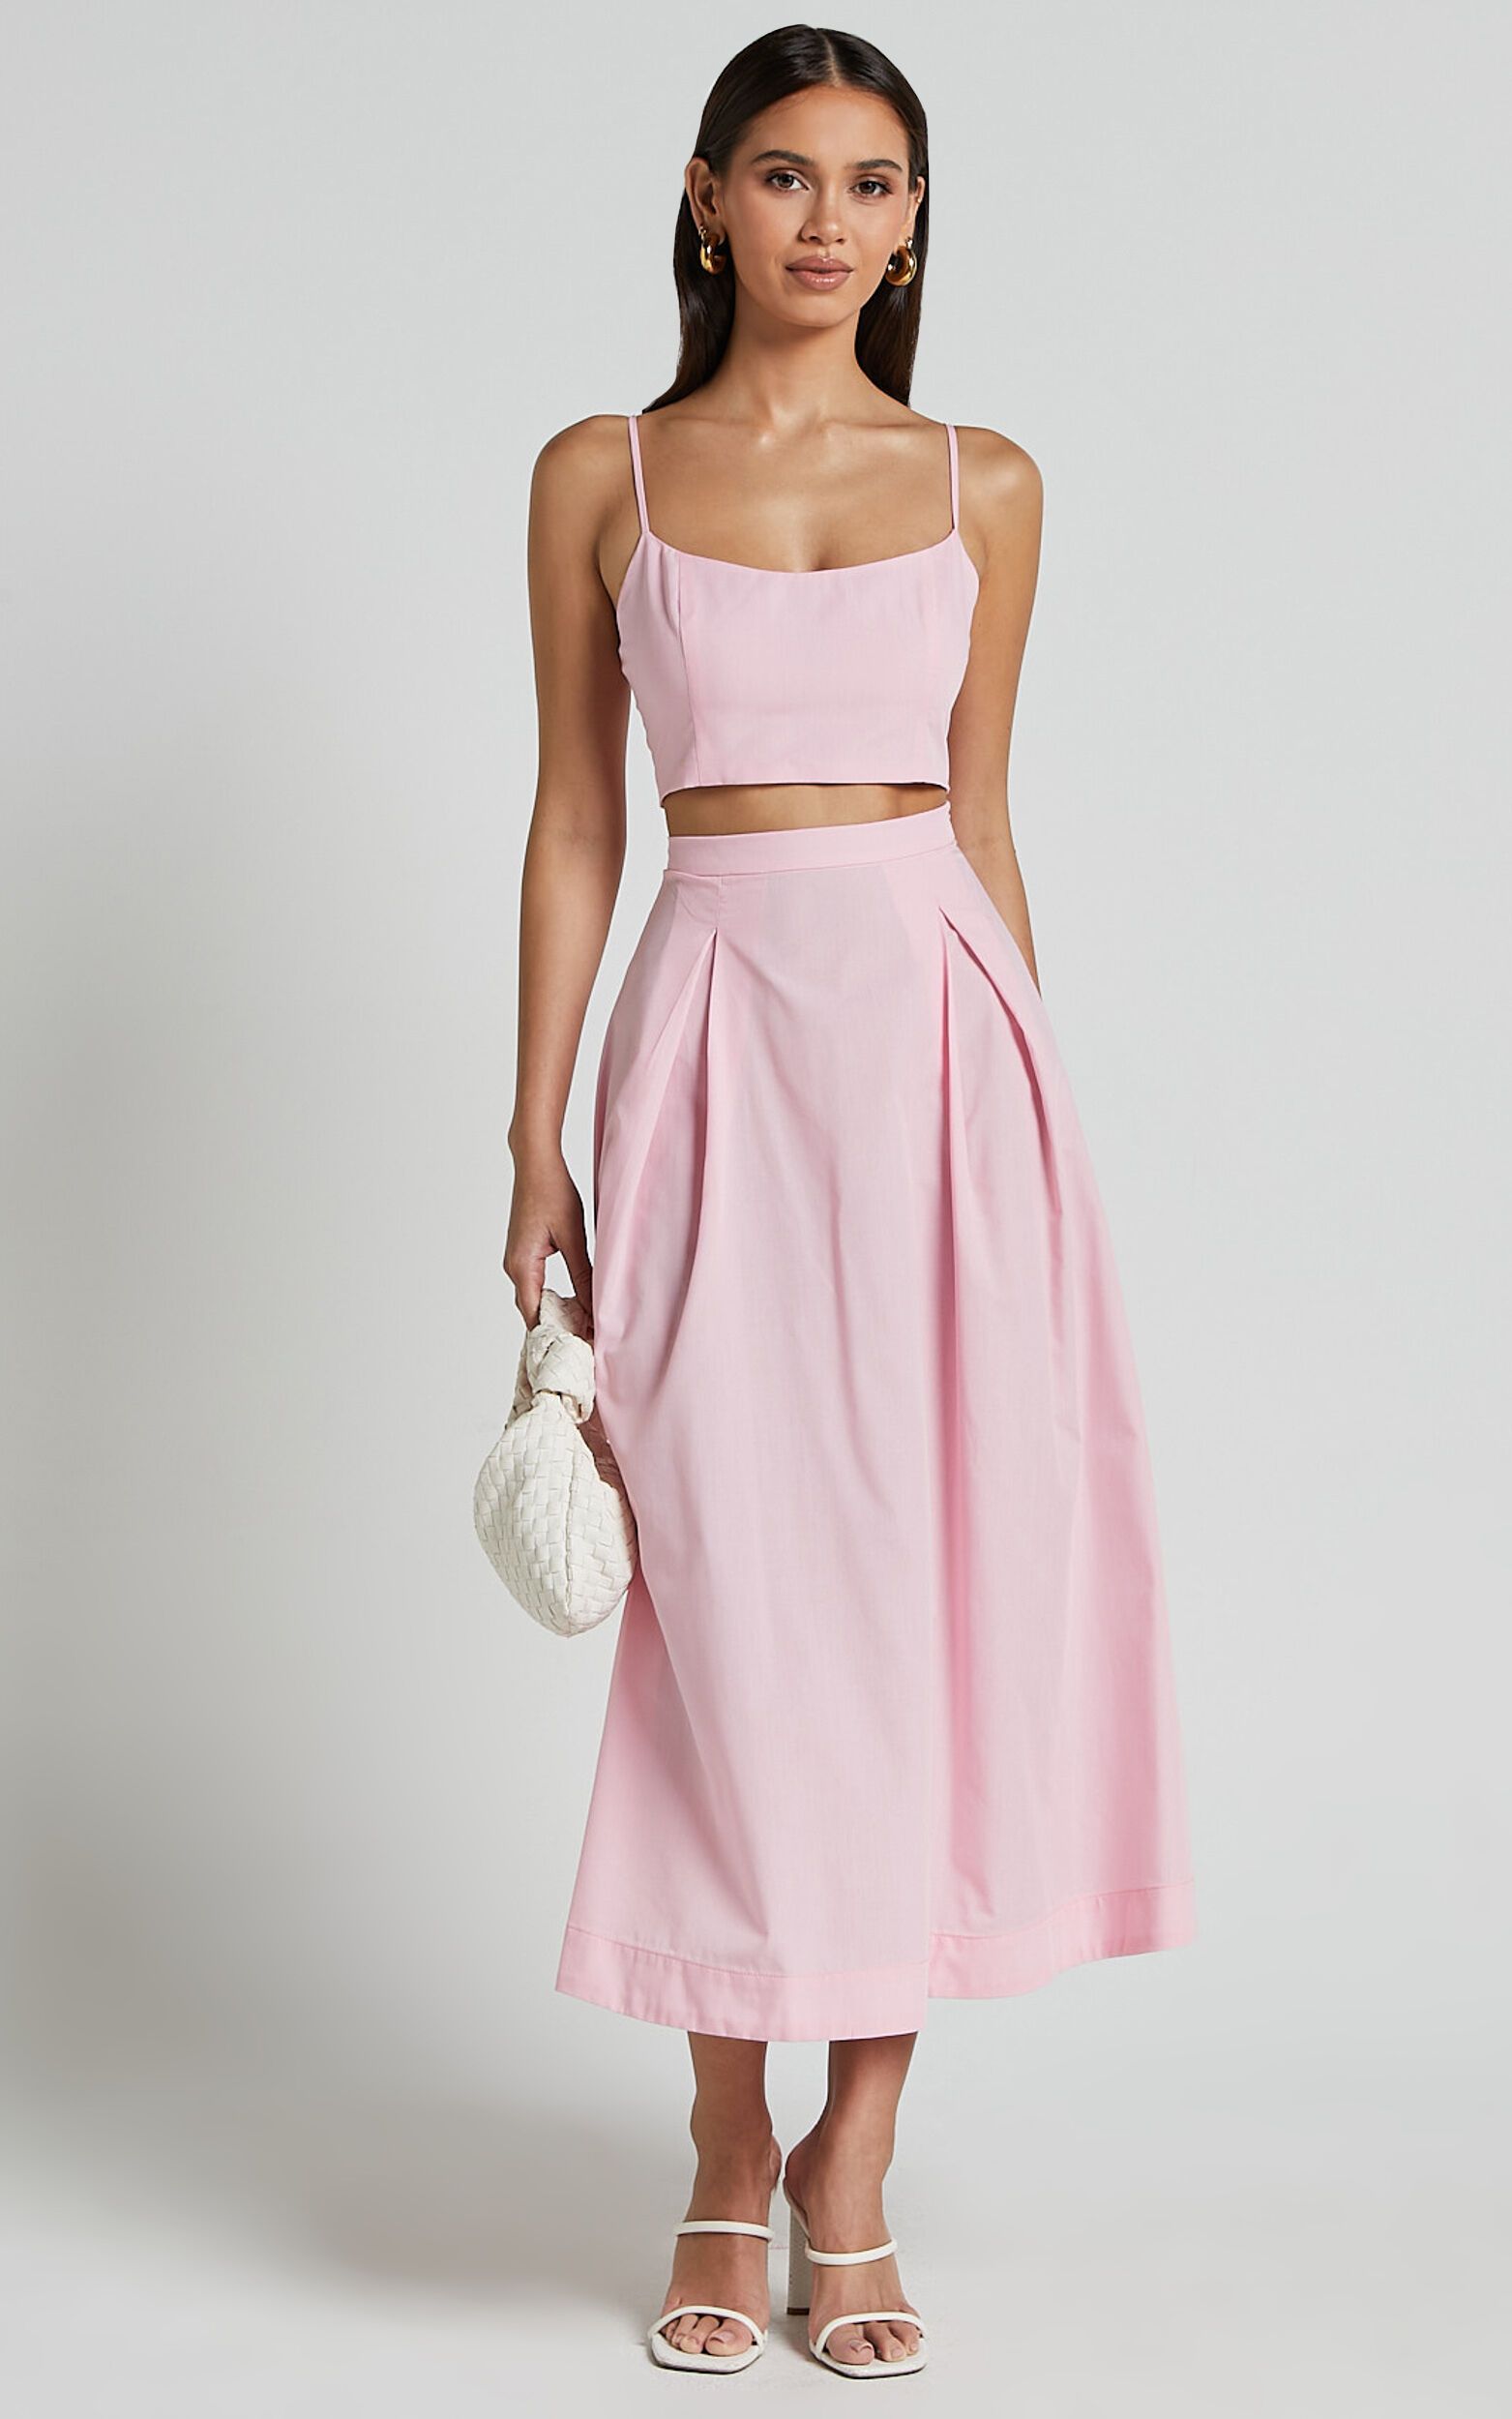 Rosalee Two Piece Set - Strappy Crop Top and High Waisted A Line Midi Skirt Set in Pink | Showpo (US, UK & Europe)